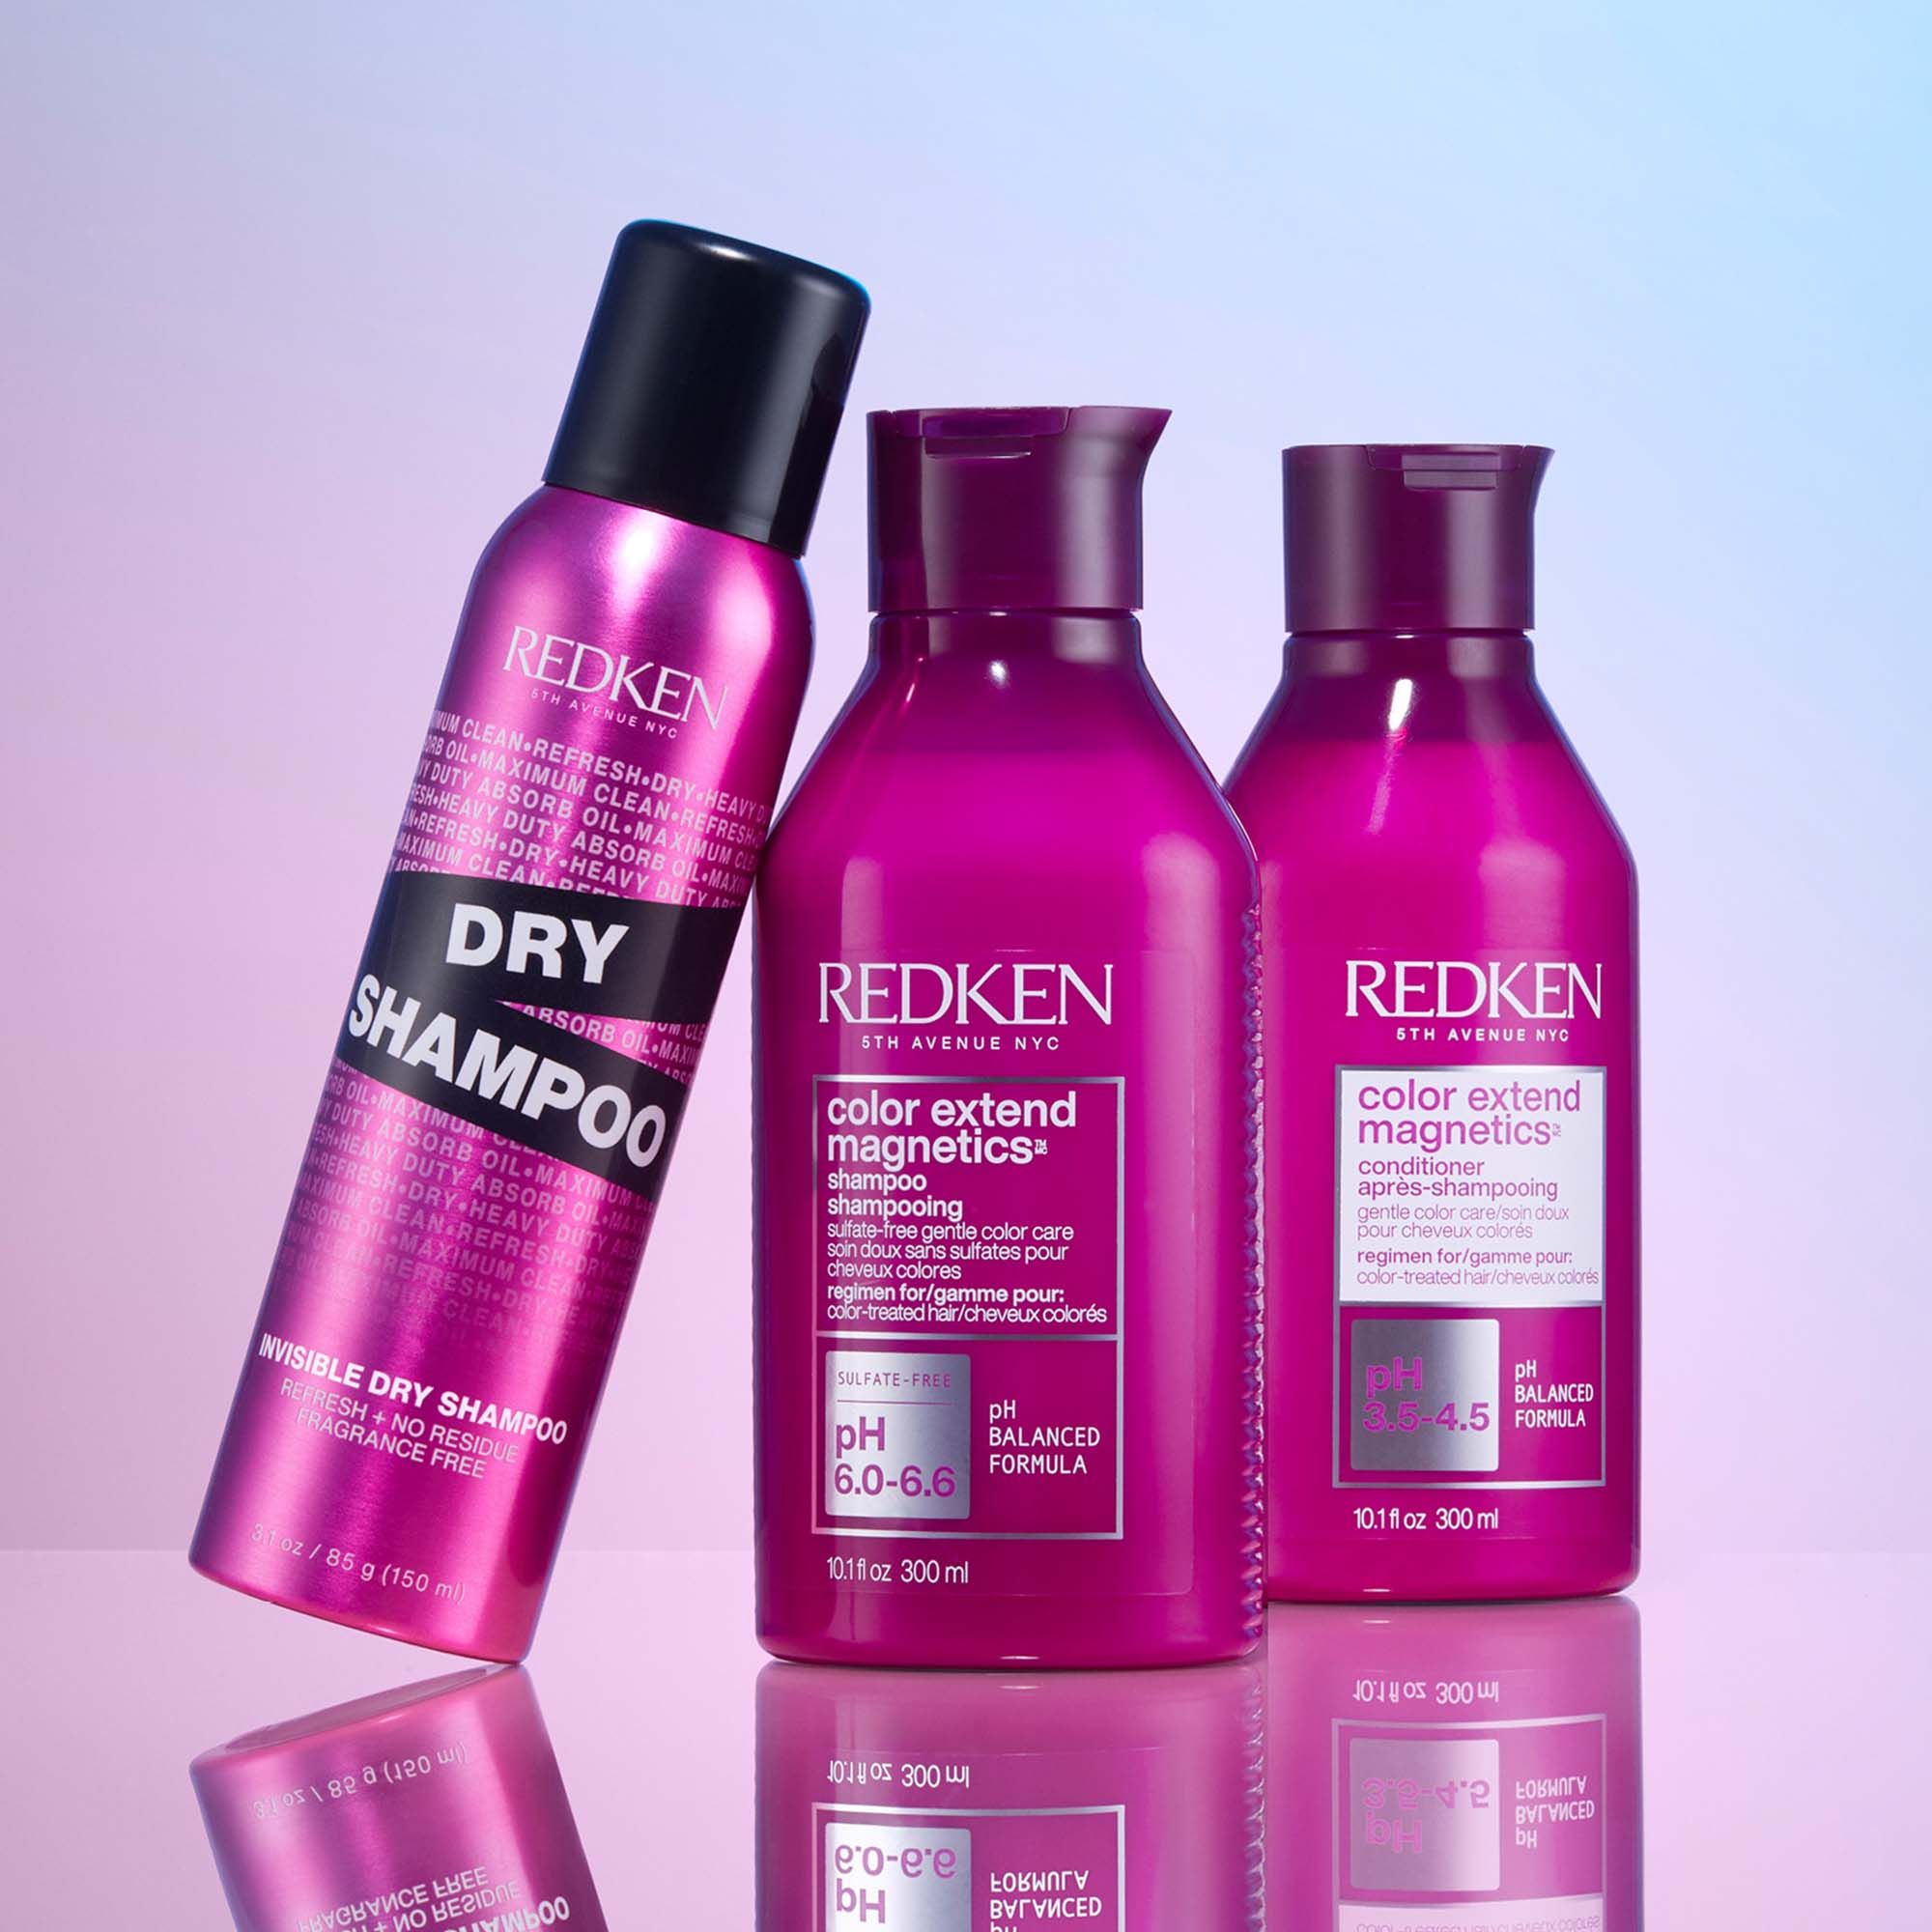 Redken-2021-Group-Invisible-Dry-Shampoo-Color-Extend-Magnetics-2000x2000.jpg